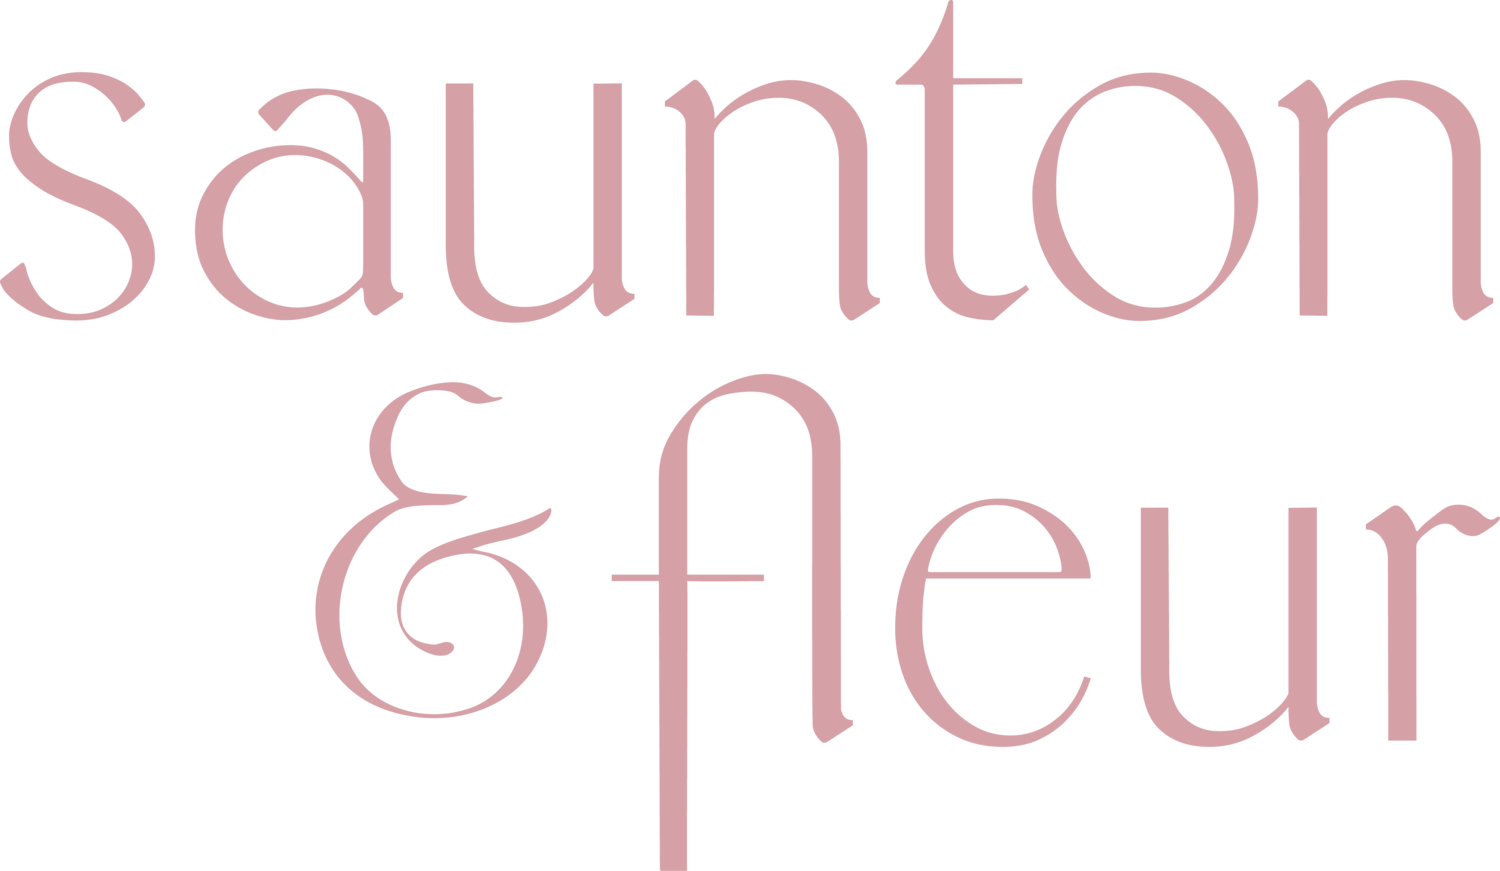 Saunton &amp; Fleur, Exquisite shabby chic furniture made in rural Leicestershire delivered direct to your door. 